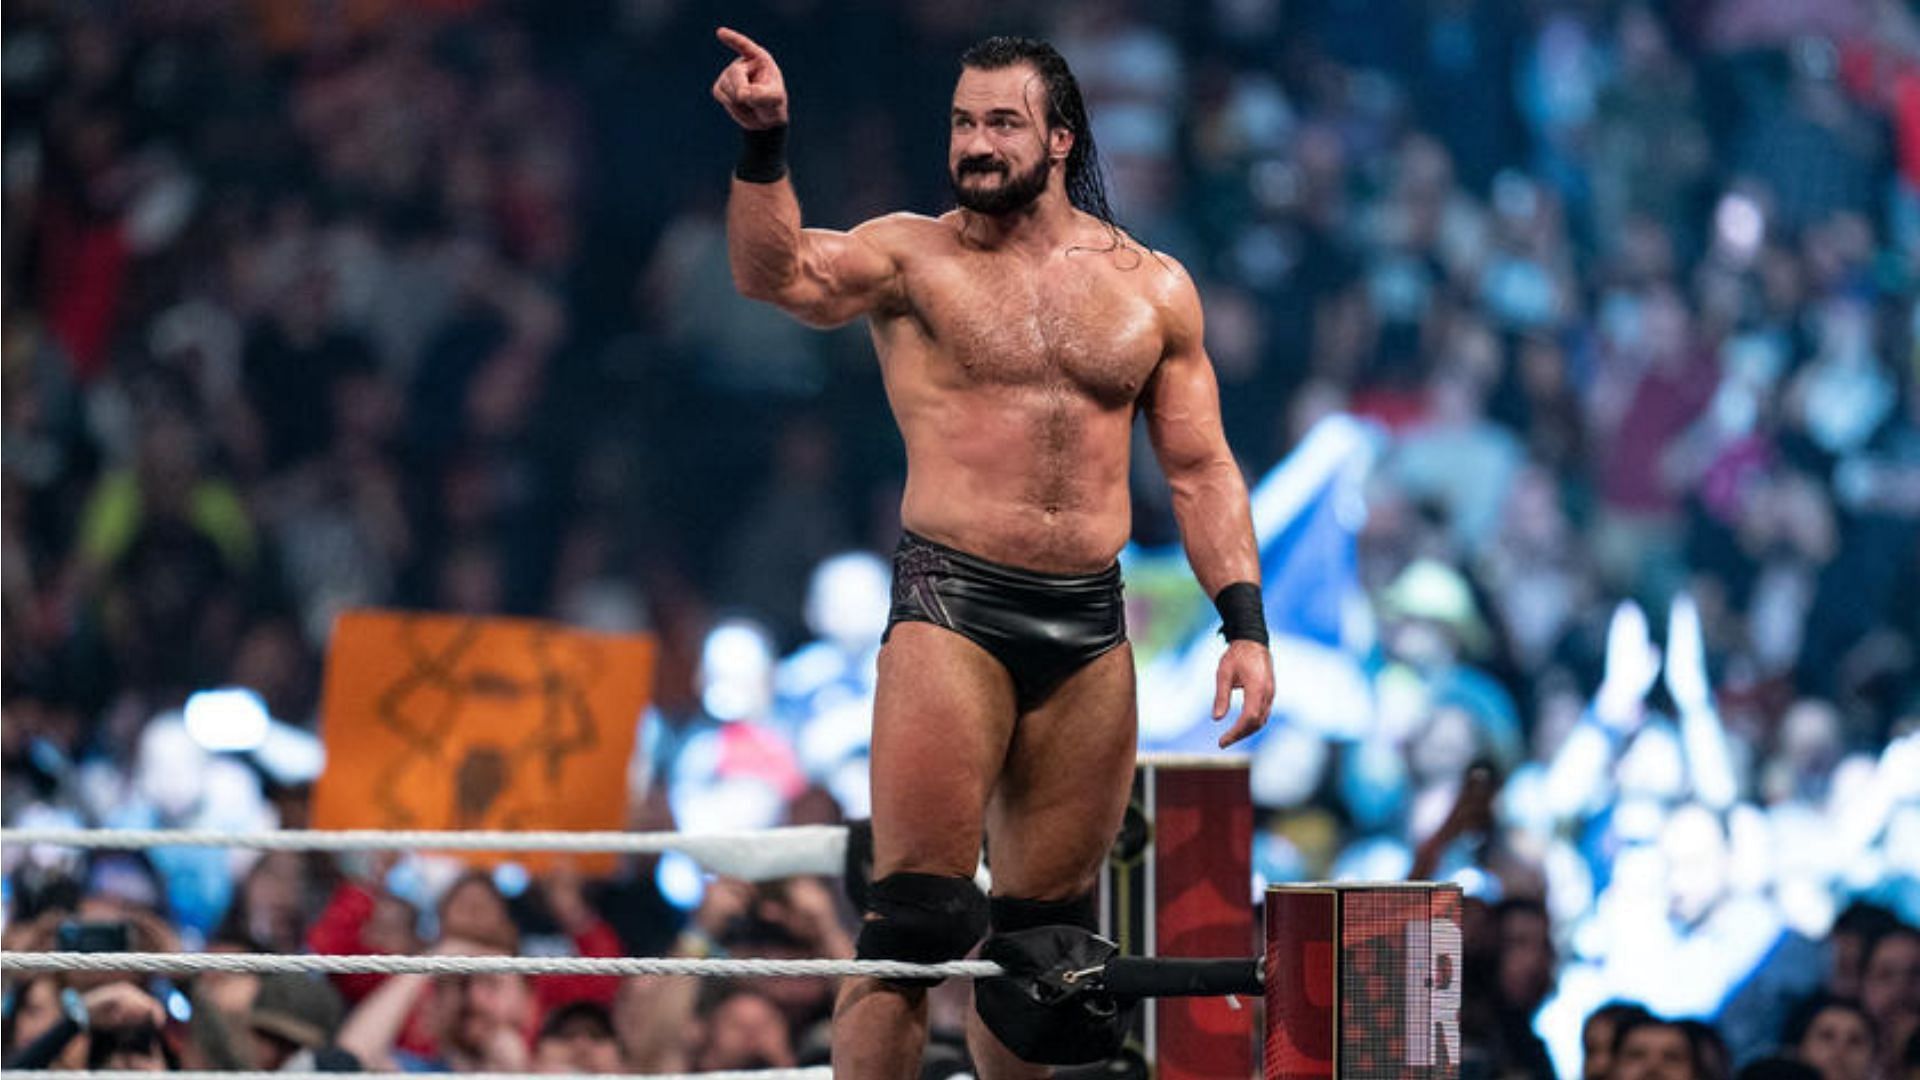 Drew McIntyre is one of the top names in WWE today